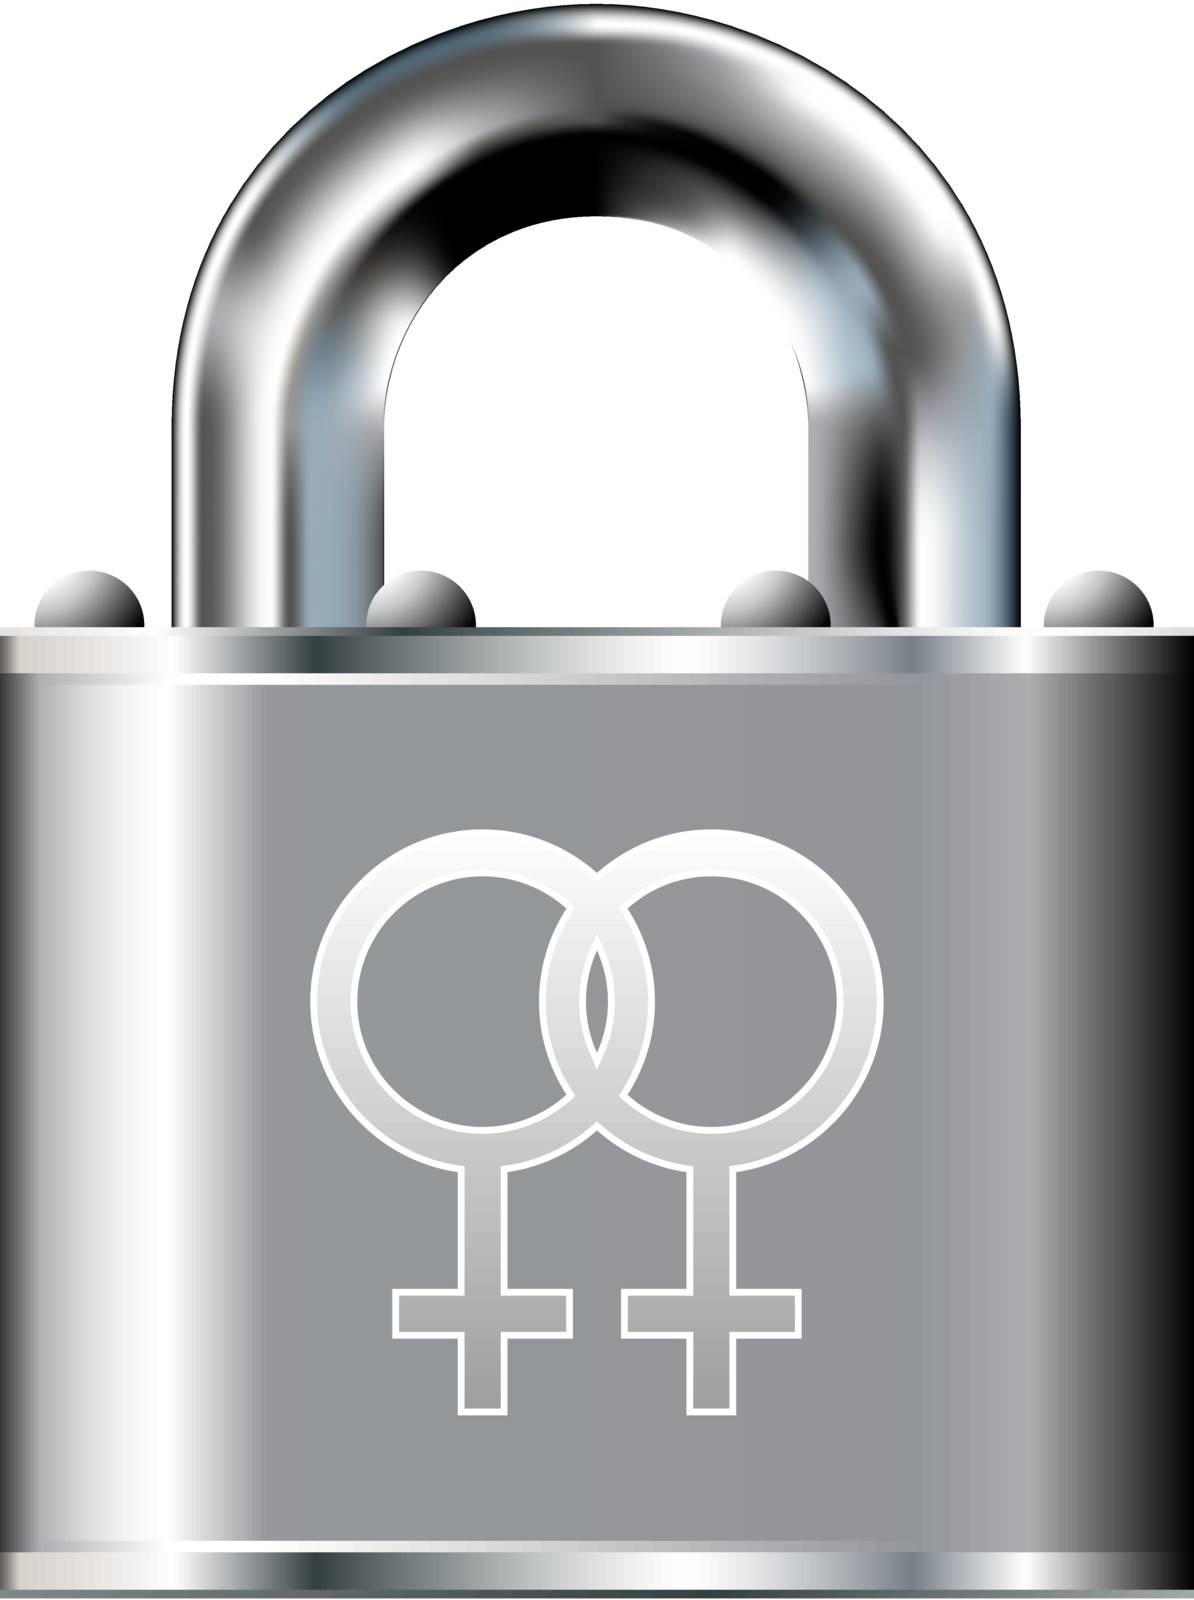 Lesbian relationship security icon by lhfgraphics